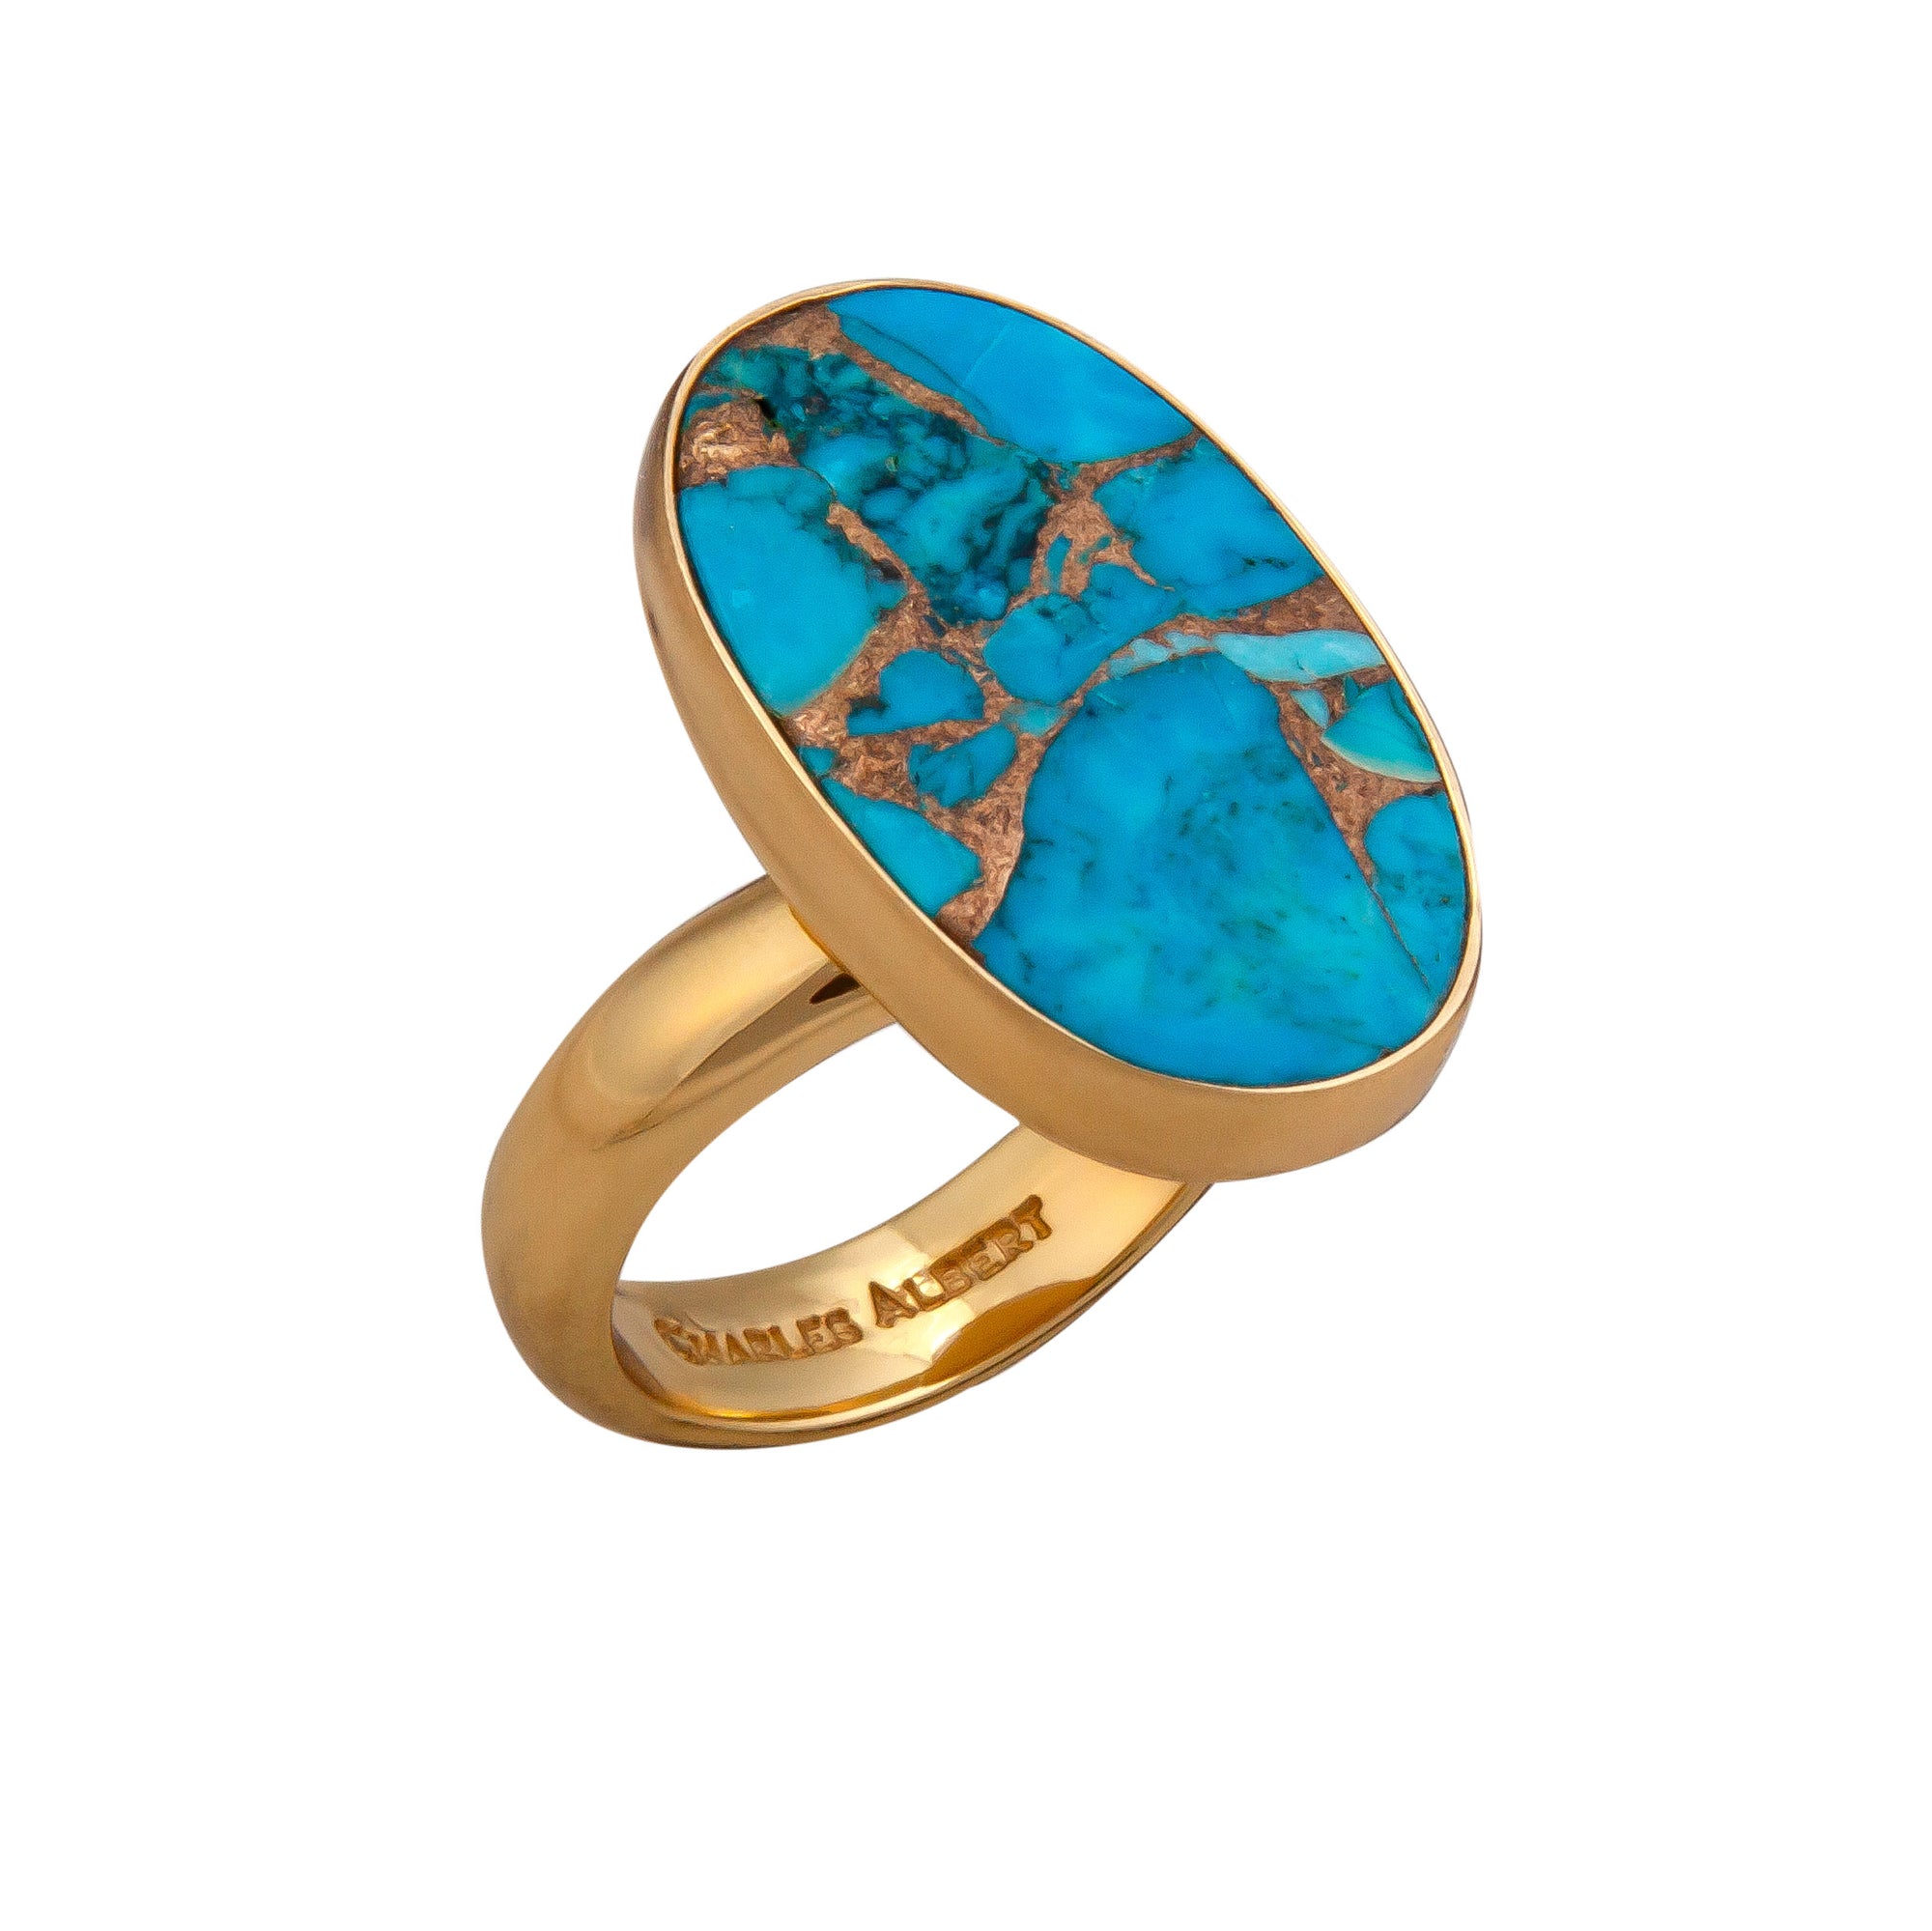 Alchemia Copper Infused Turquoise Adjustable Ring - Charles Albert Inc